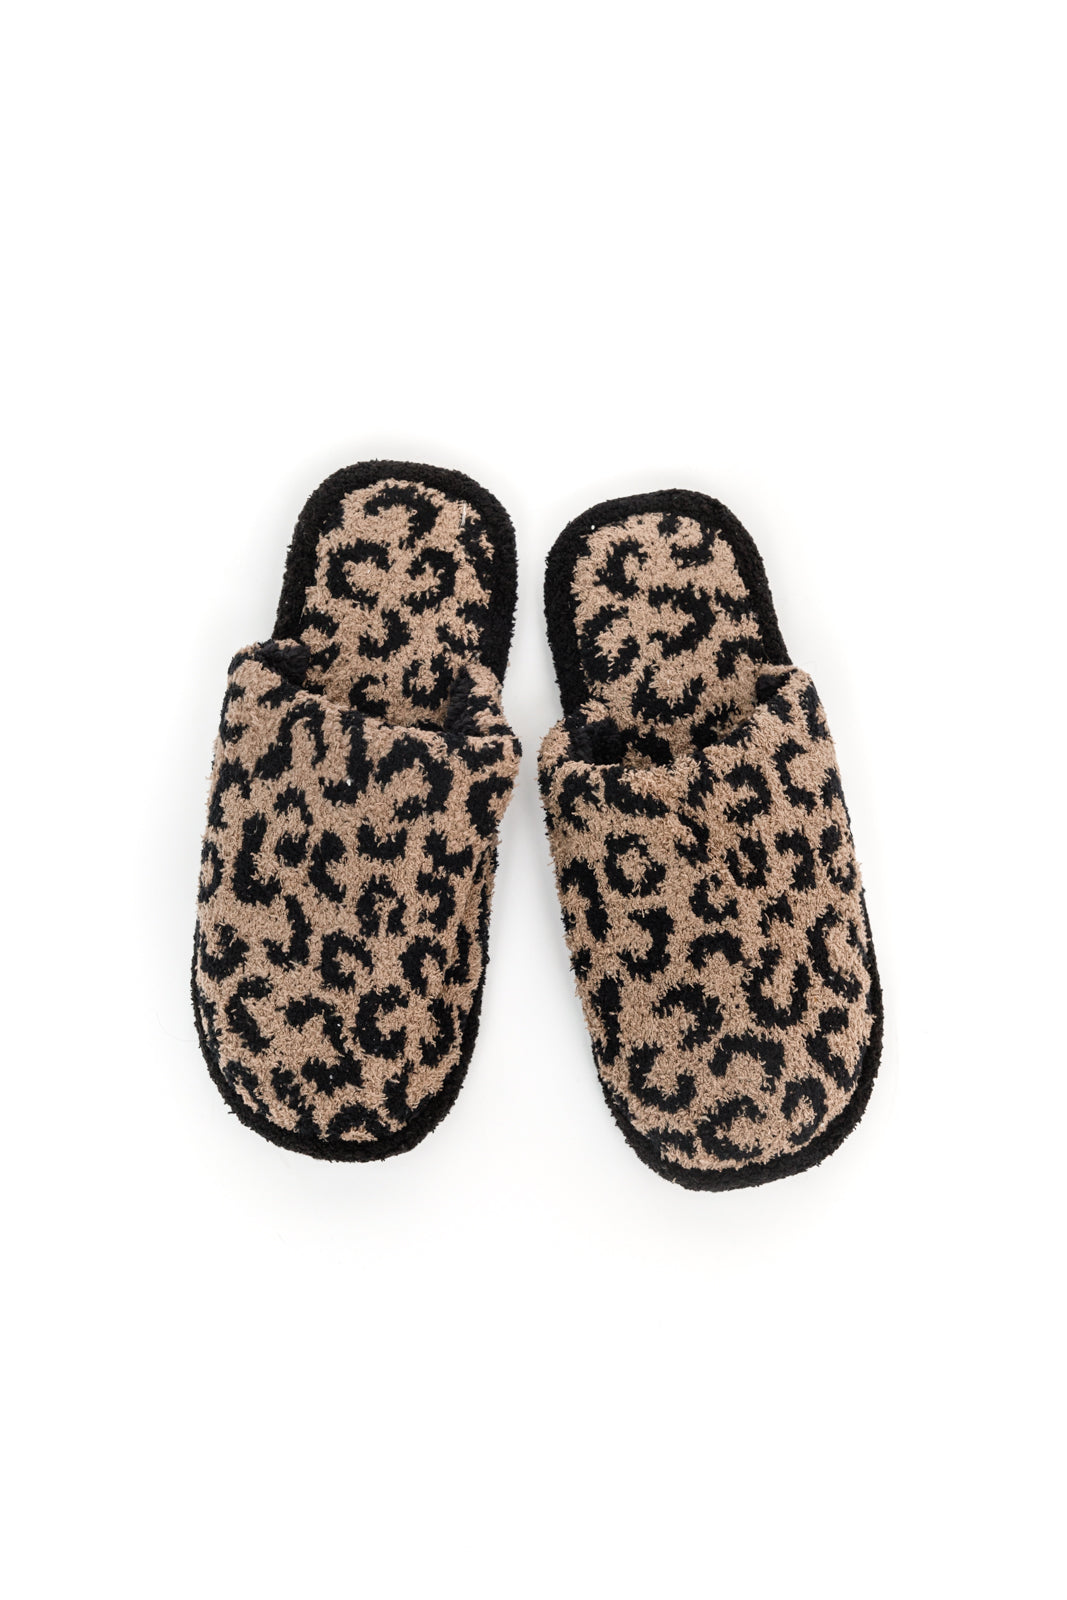 fcity.in - Design Tiger Print Fancy And Functional Slippers For Women  Perfect